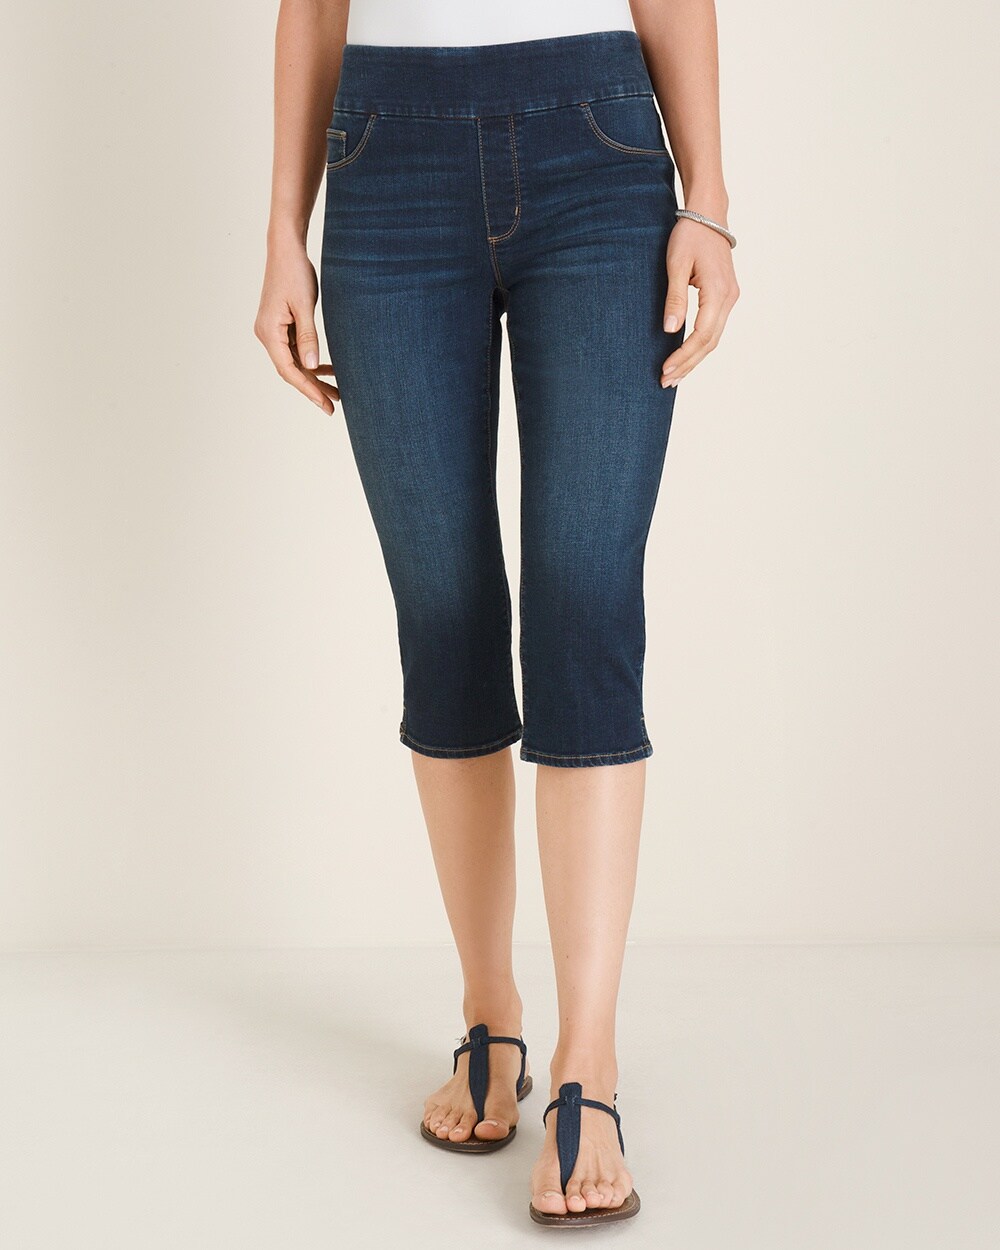 7 for all mankind ladies jeans